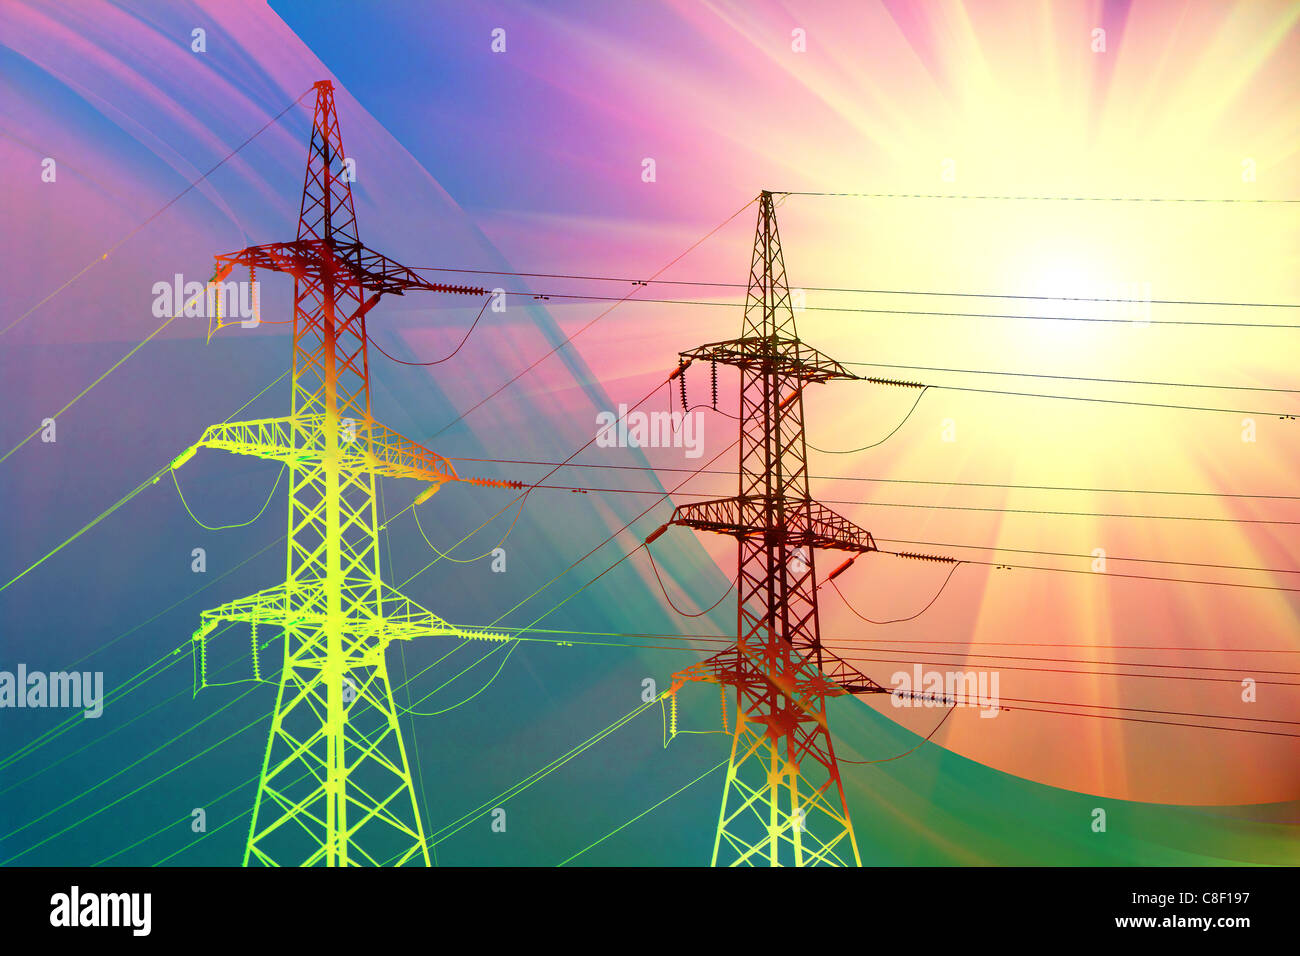 electric power transmission towers at sunset Stock Photo